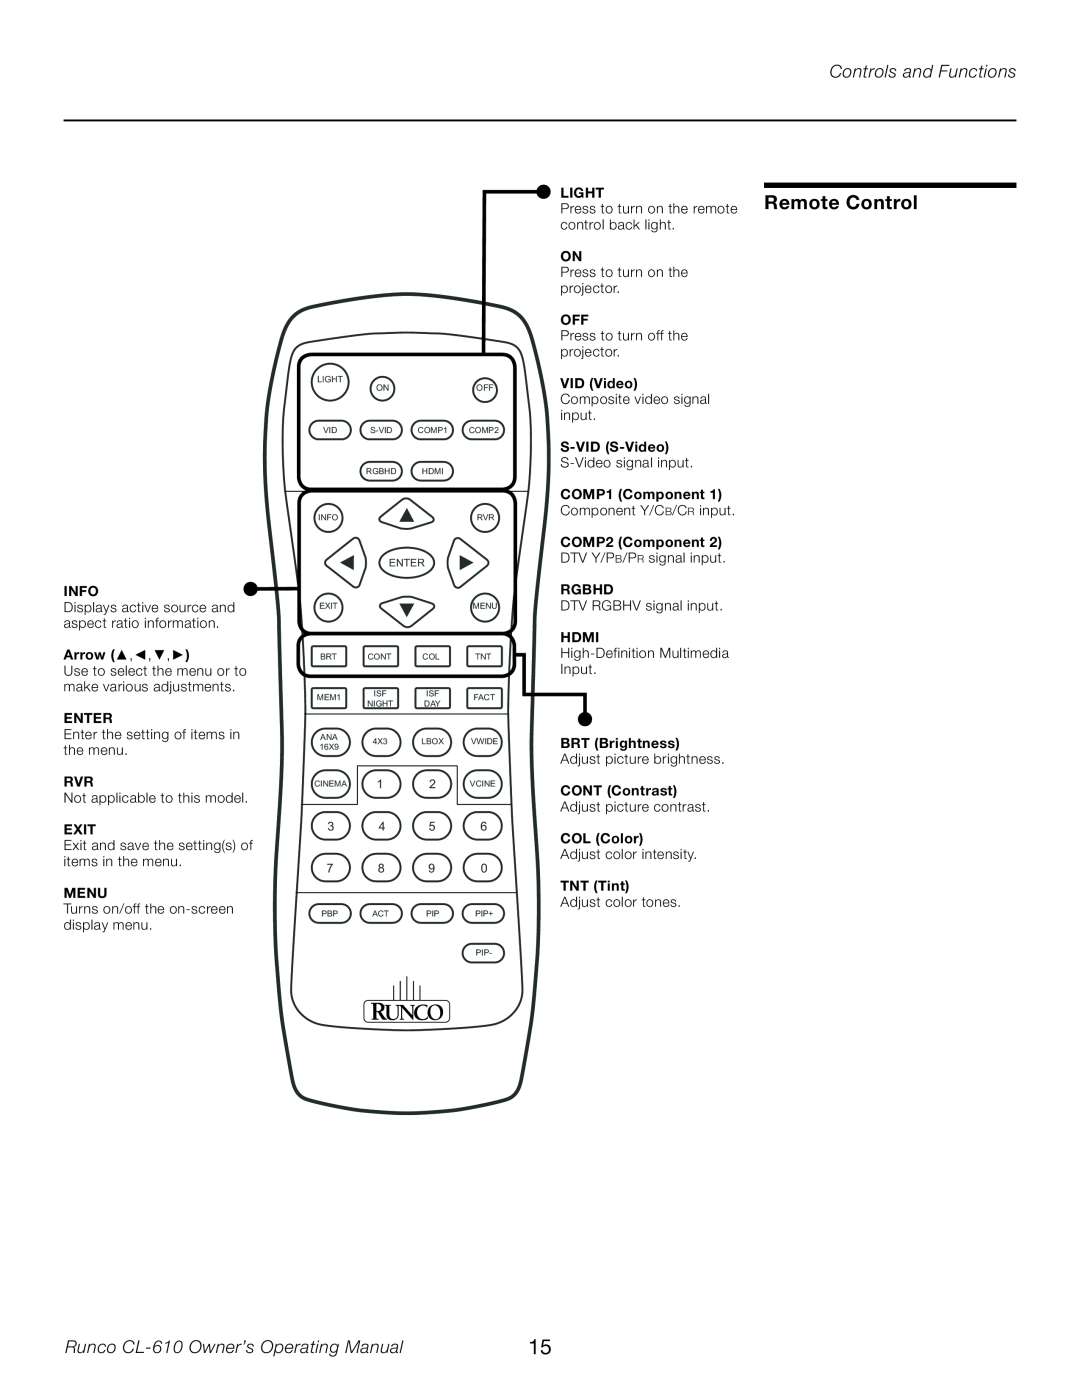 Runco CL-610LT manual Remote Control, Controls and Functions, Runco CL-610 Owner’s Operating Manual 